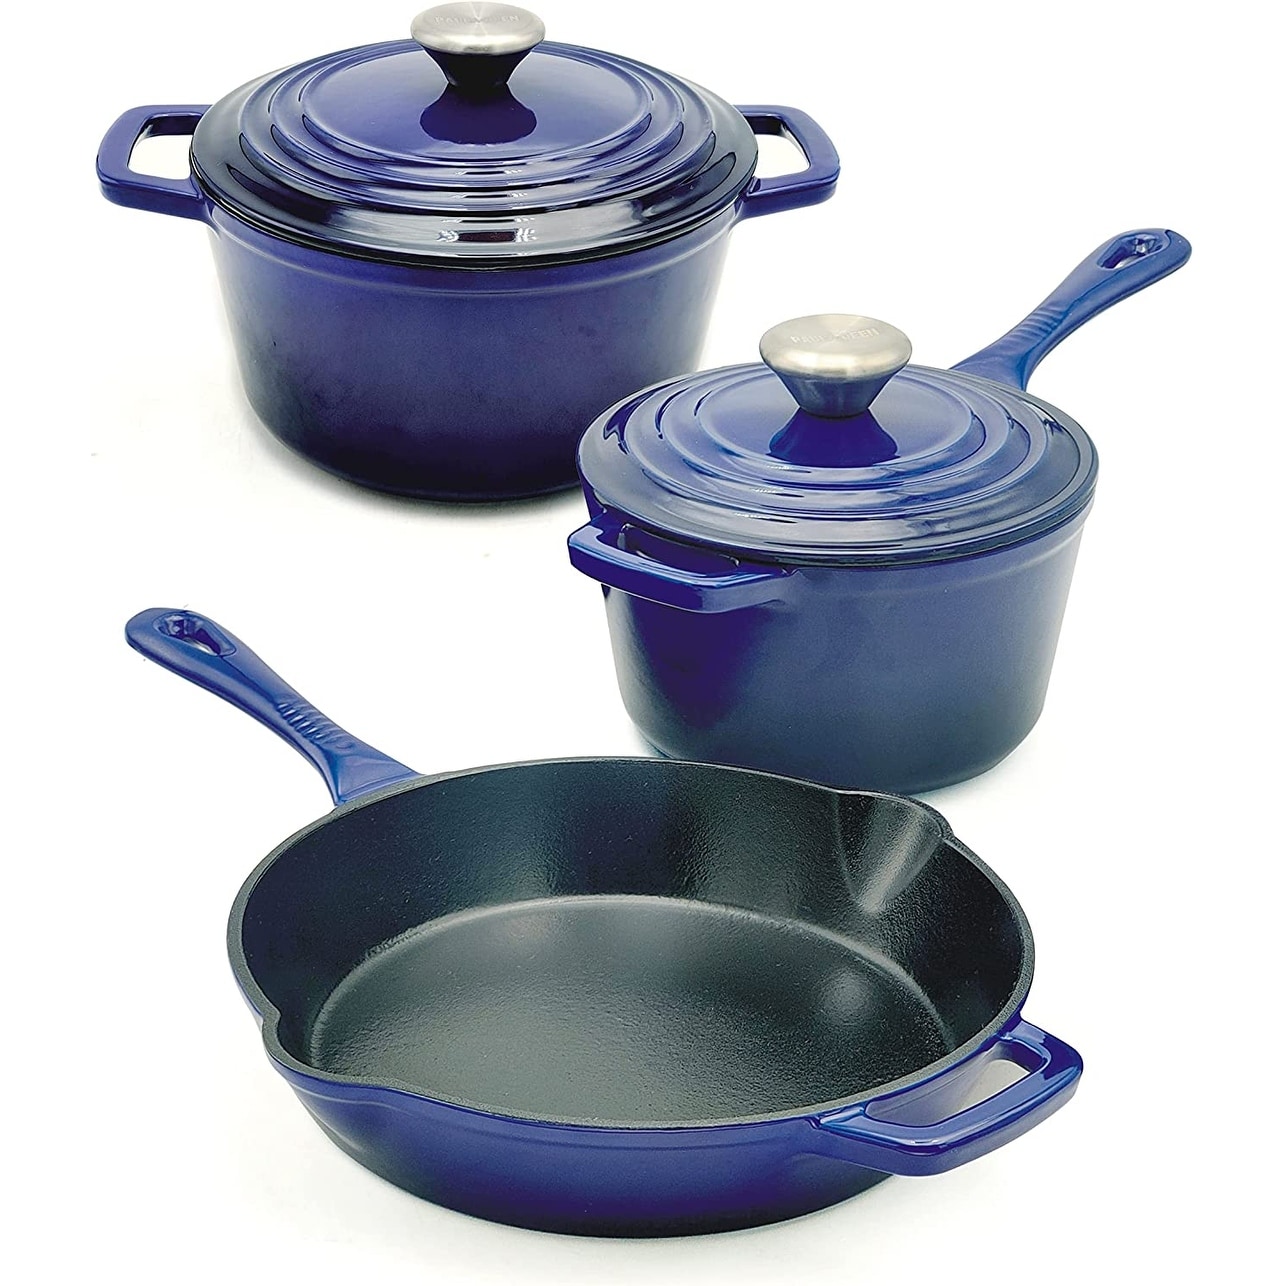 10 Best Cast Iron Cookware Sets in 2018 - Cast Iron Pots, Pans and